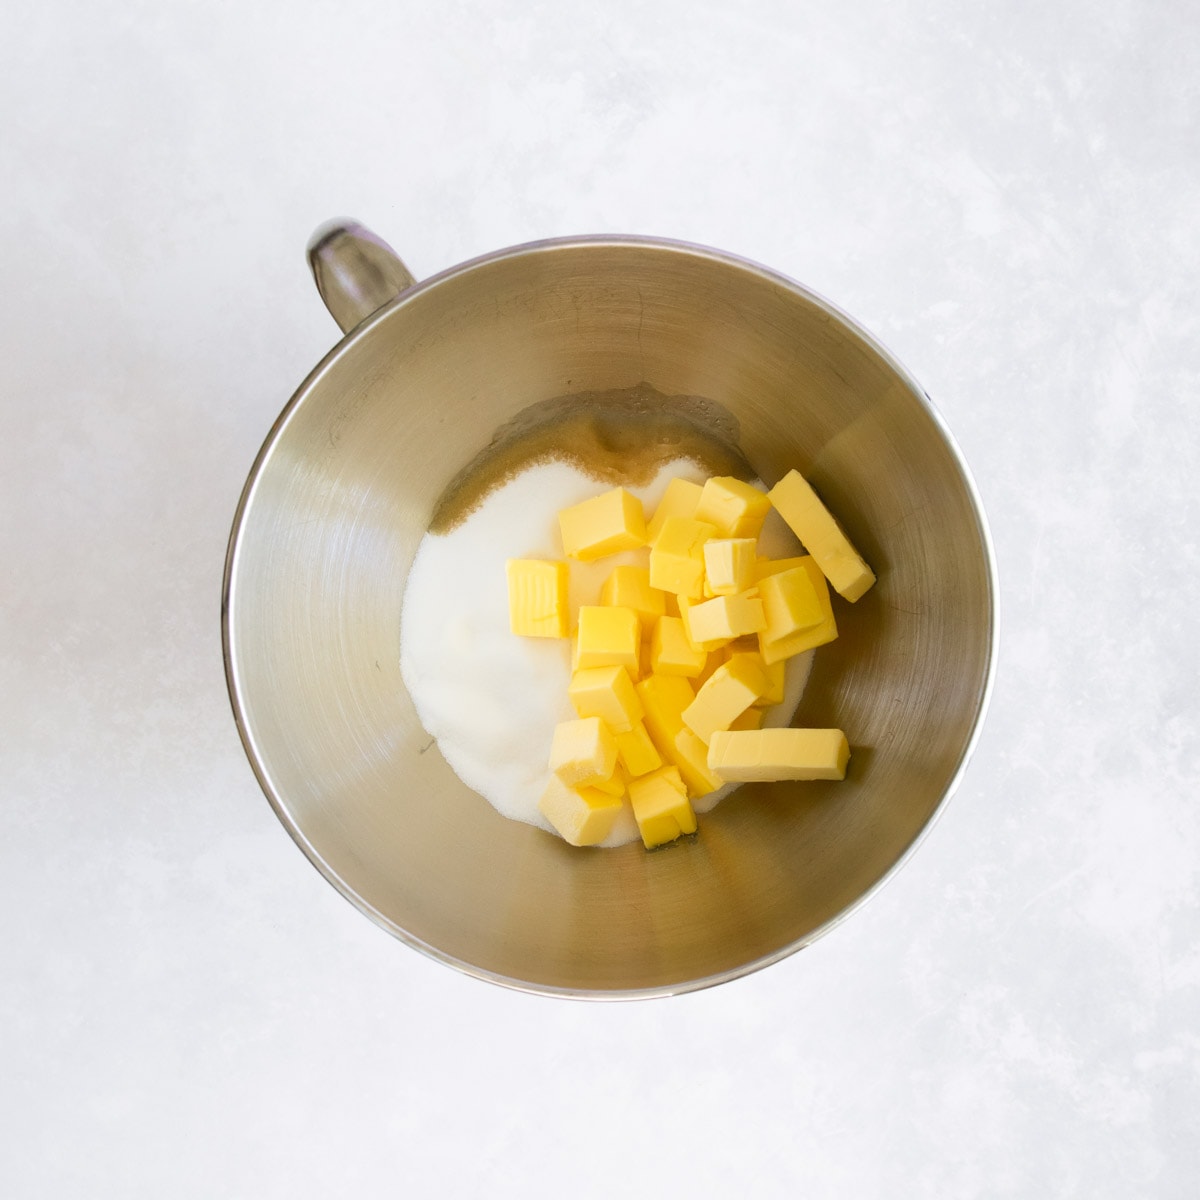 Sugar, butter and vanilla extract in a stainless steel mixer bowl.